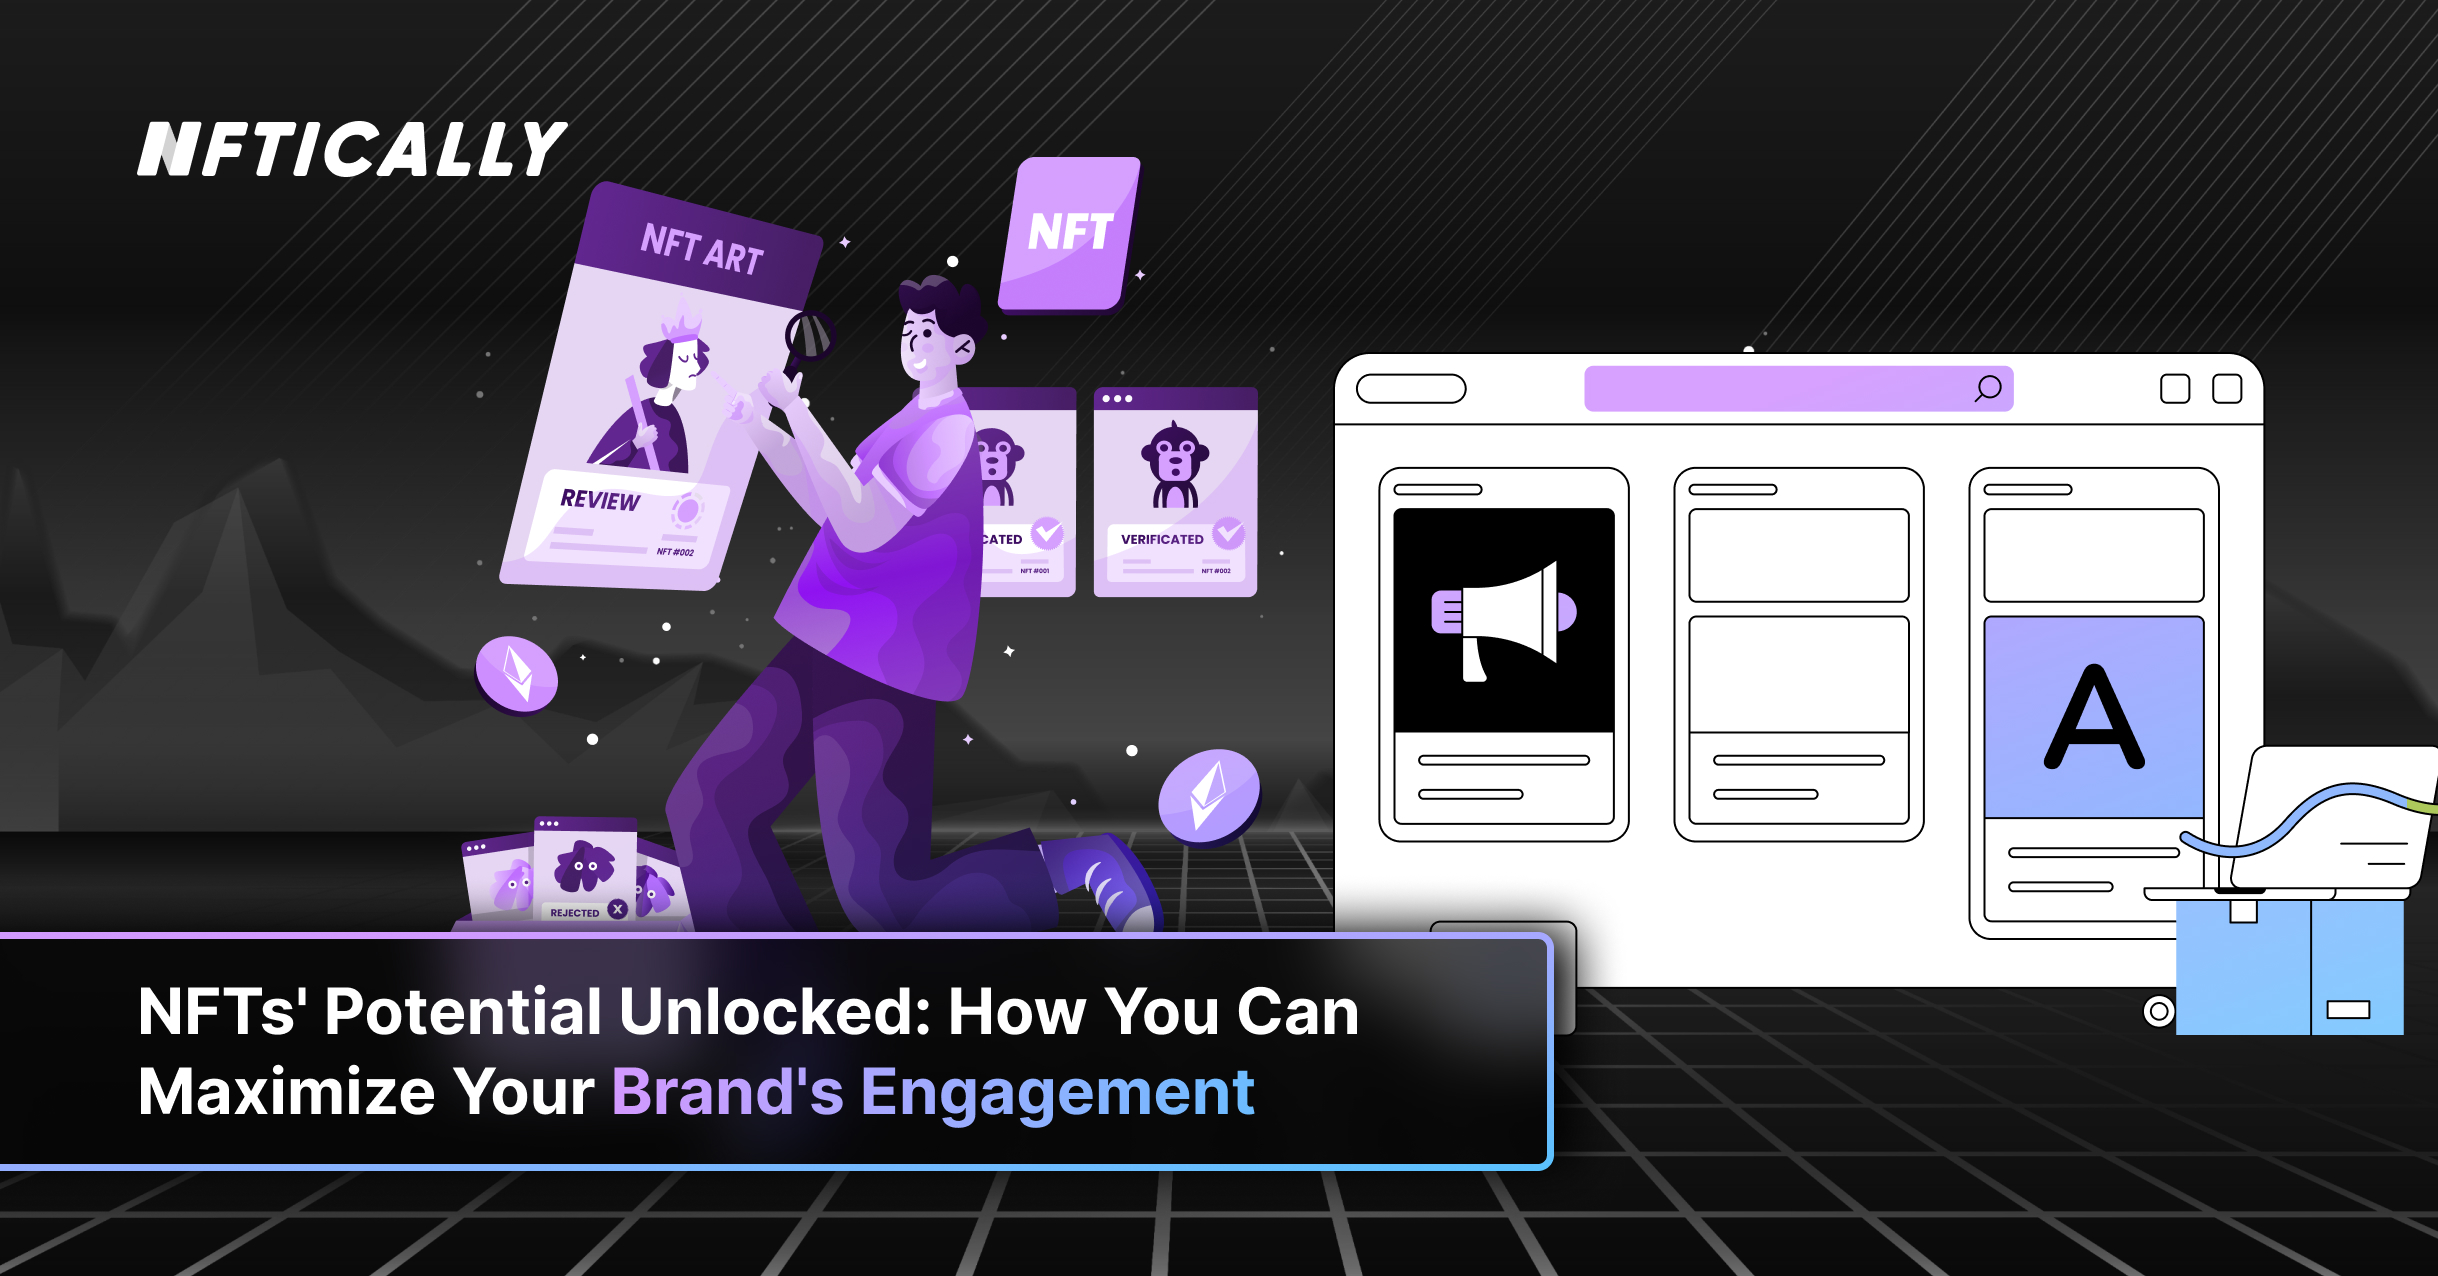 NFTs’ Potential Unlocked: How You Can Maximize Your Brand’s Engagement